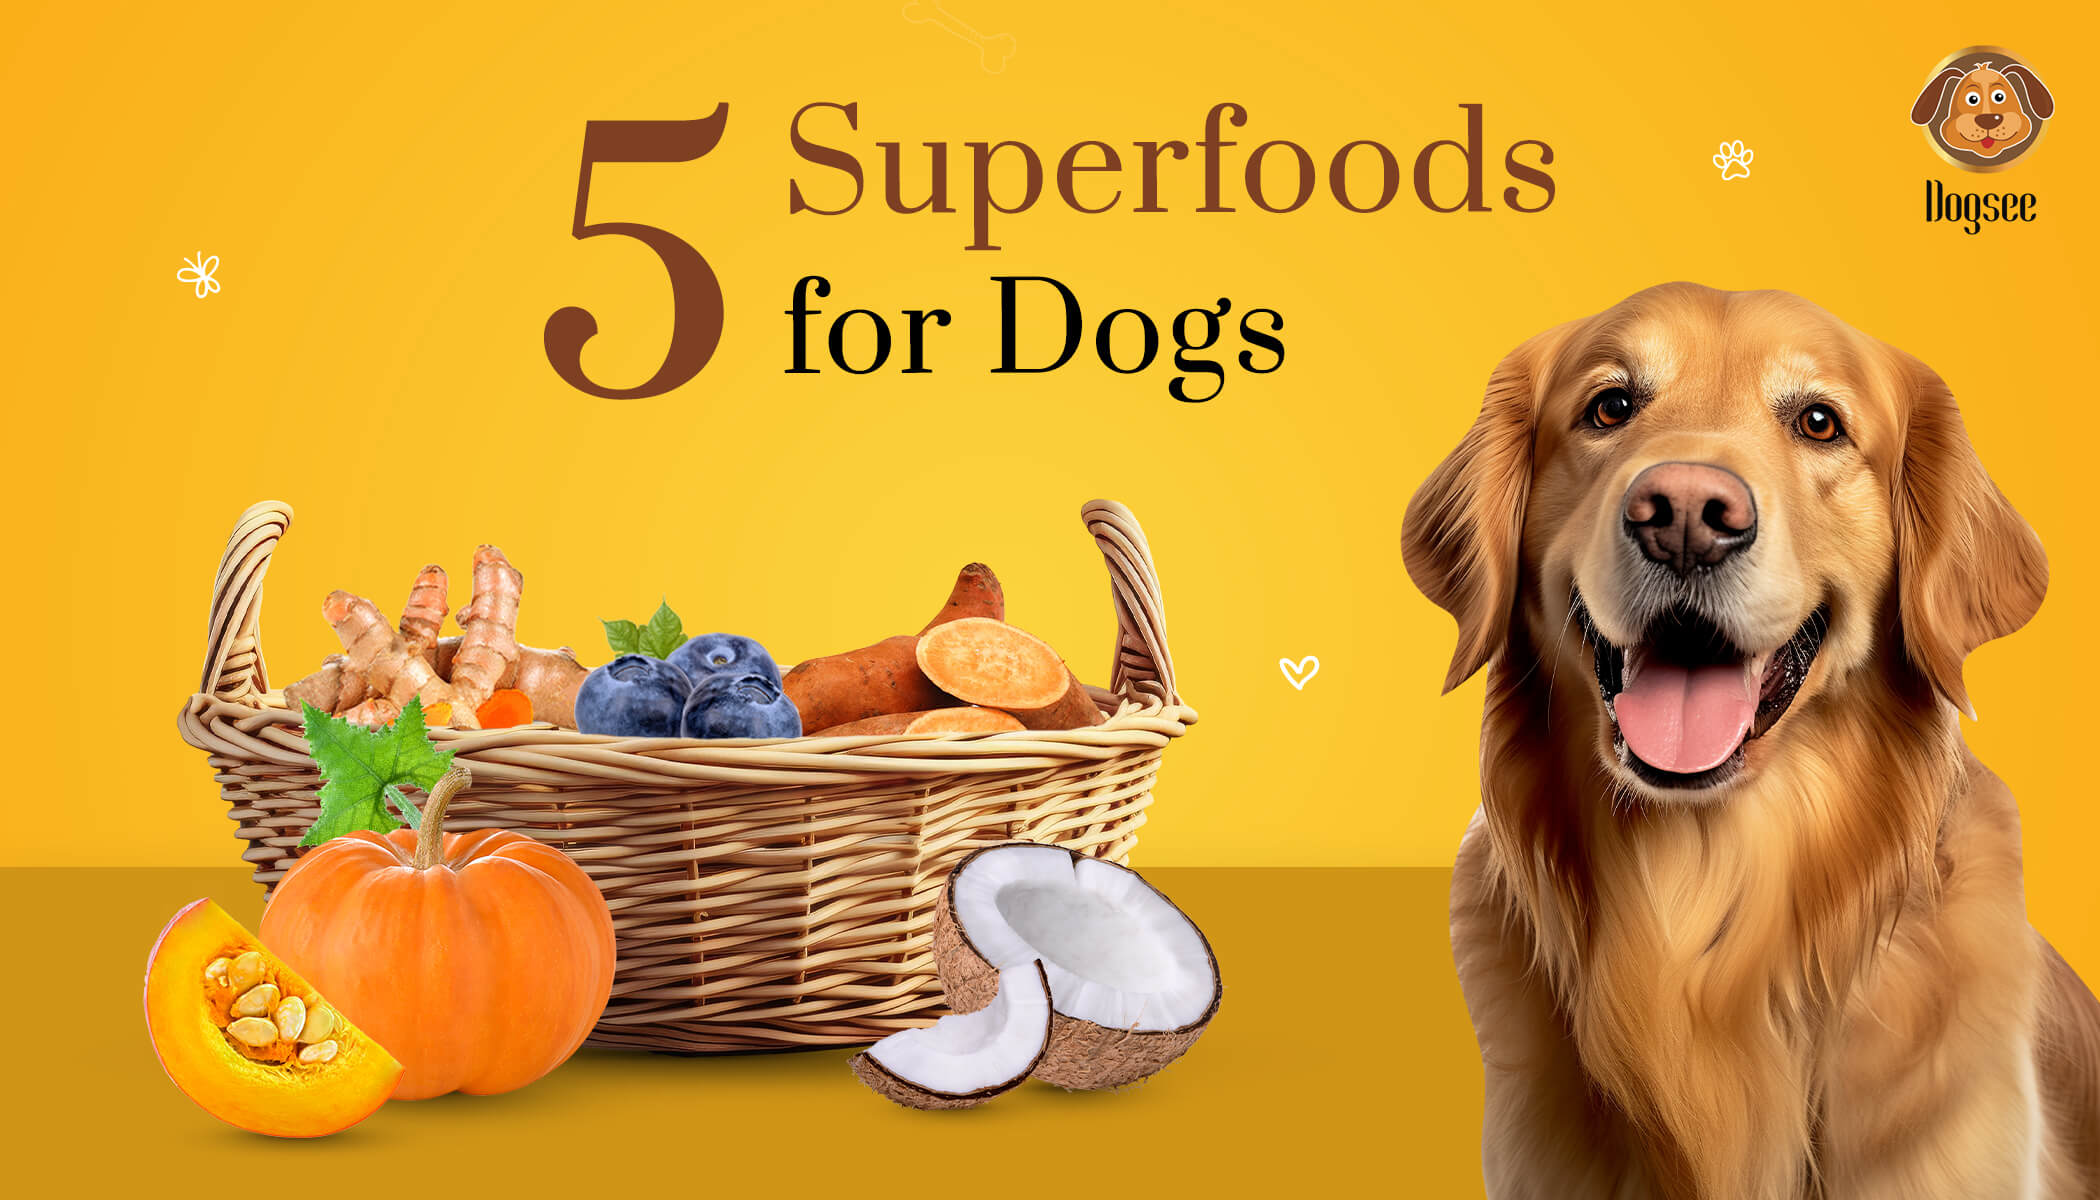 5 Superfoods for Dogs